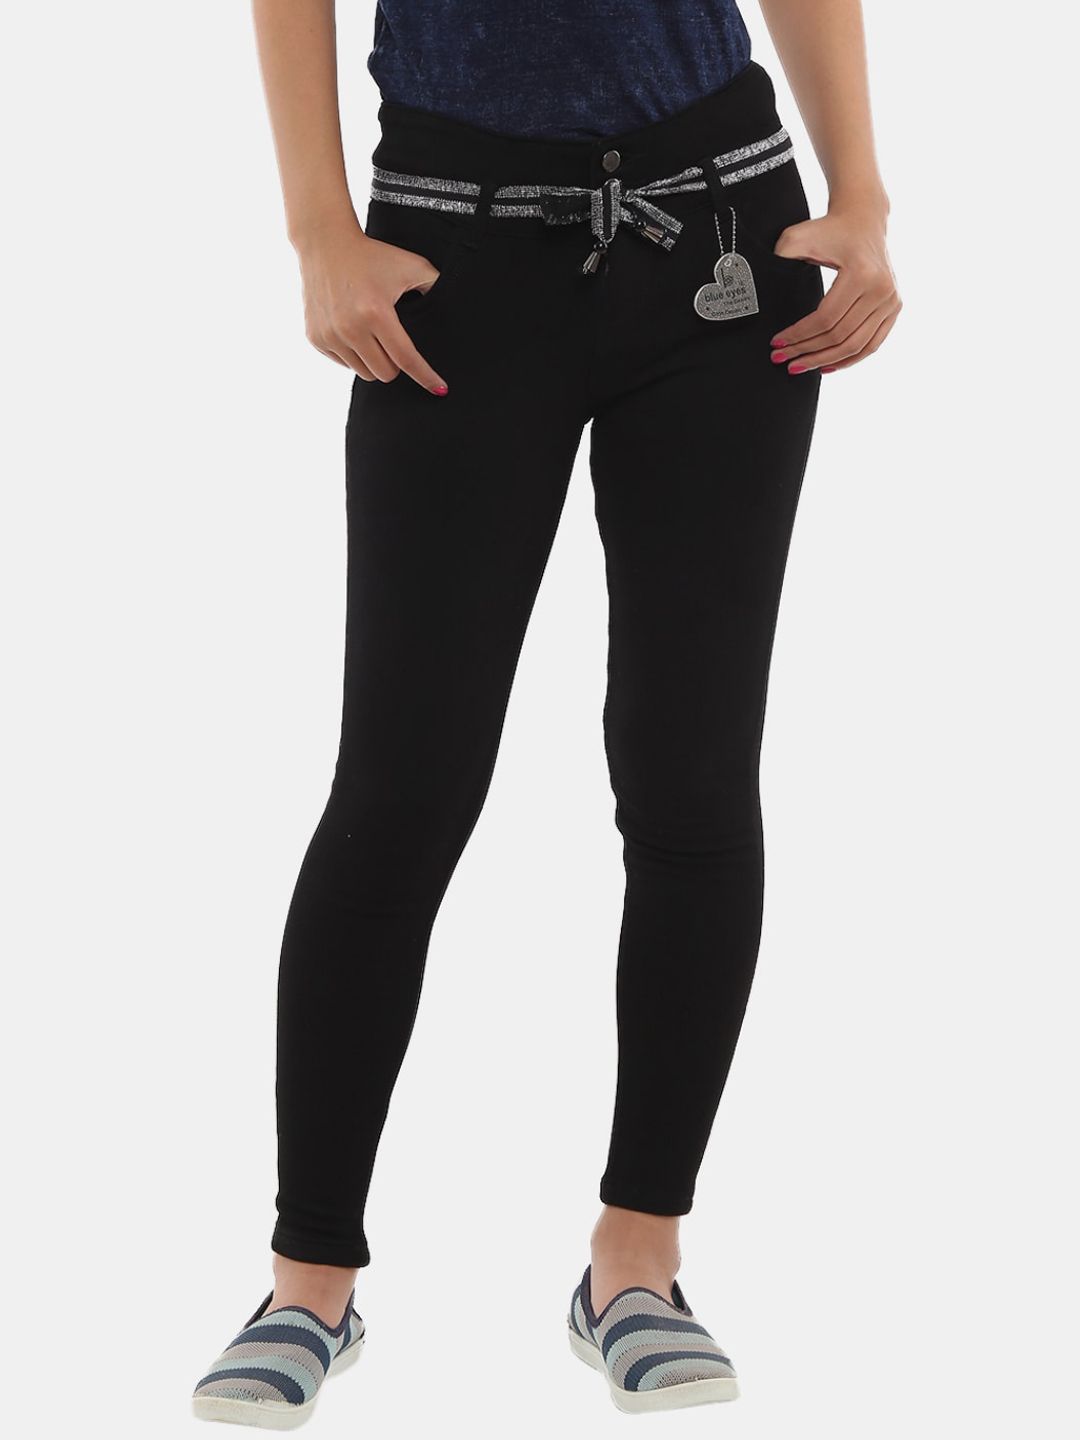 V-Mart Women Black Stretchable Jeans Price in India